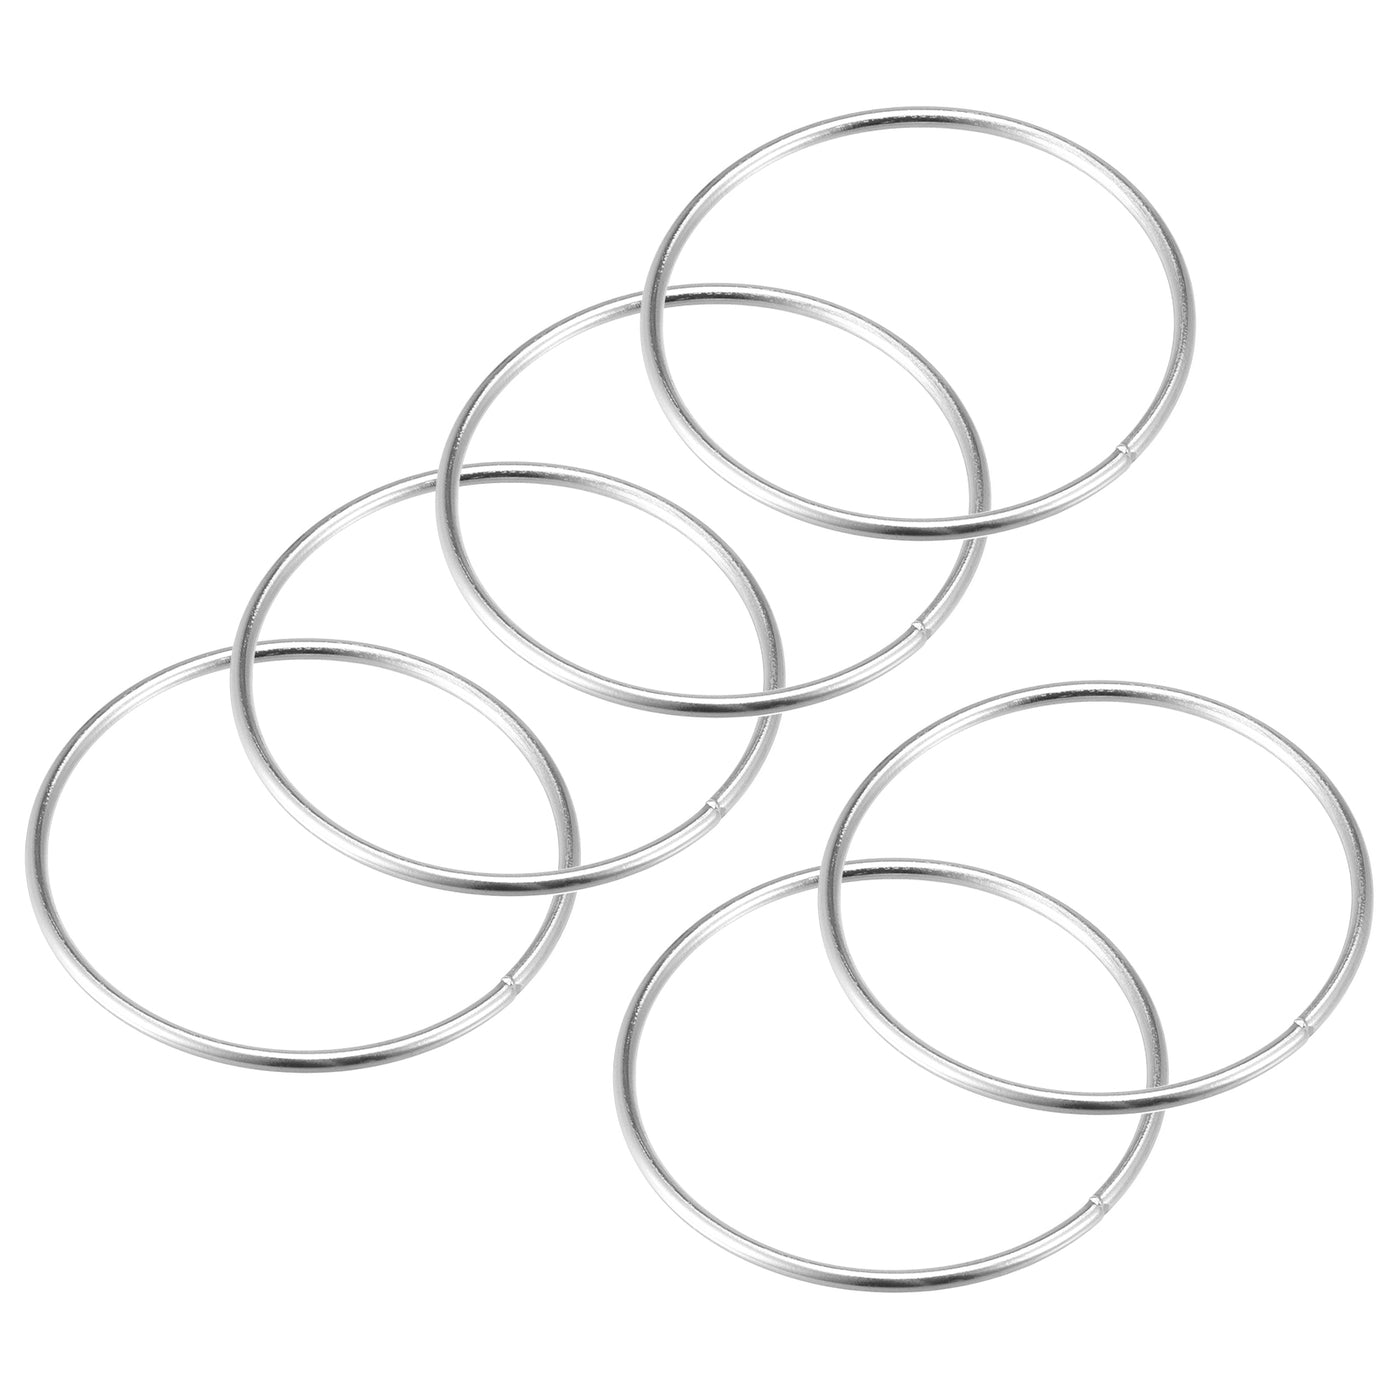 uxcell Uxcell 65mm(2.56") OD Metal O Ring Non-Welded Craft Hoops for DIY Silver Tone 10pcs